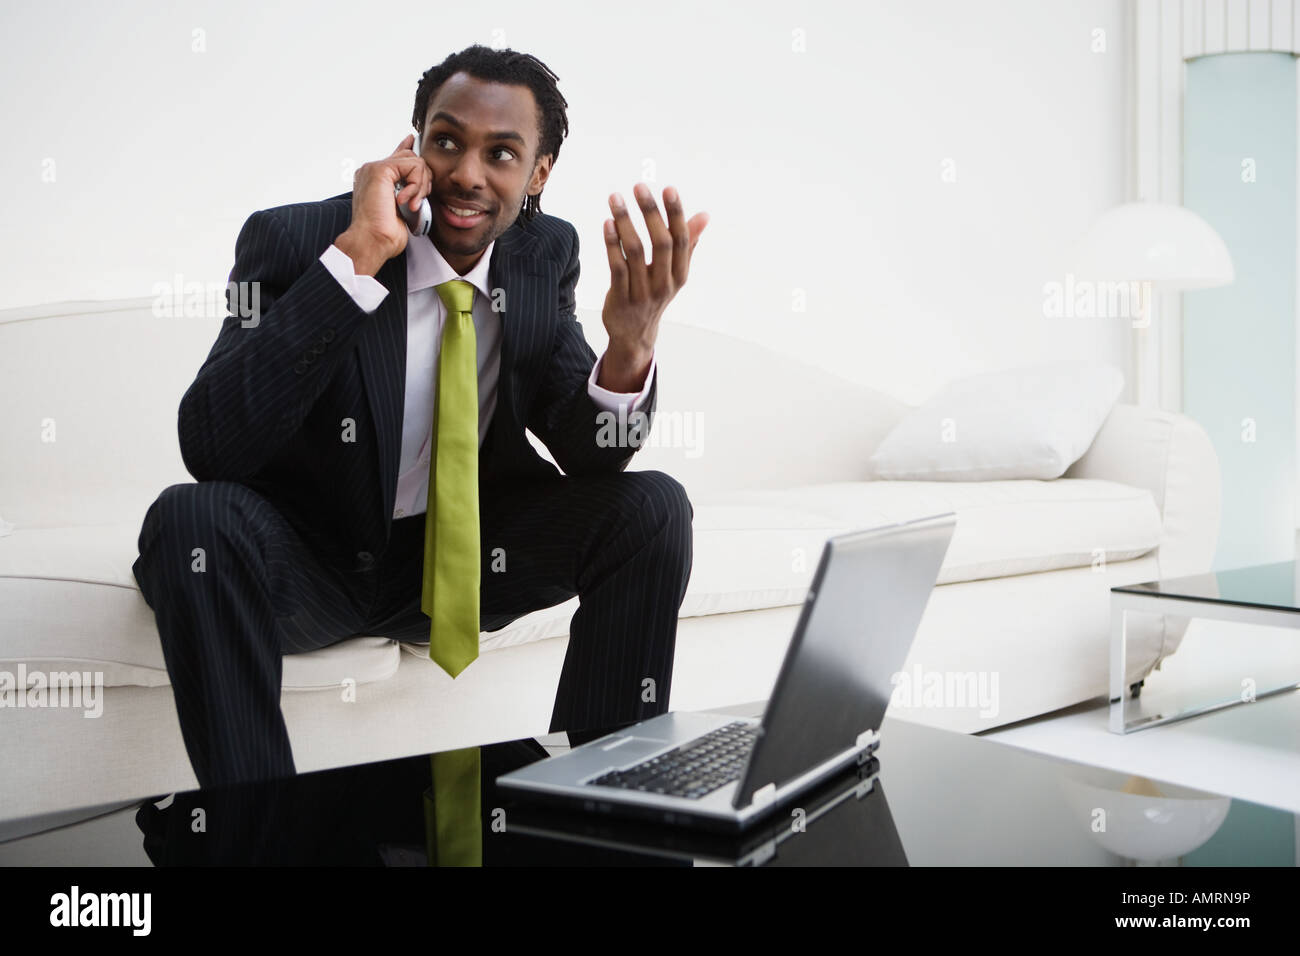 African businessman talking on cell phone Stock Photo